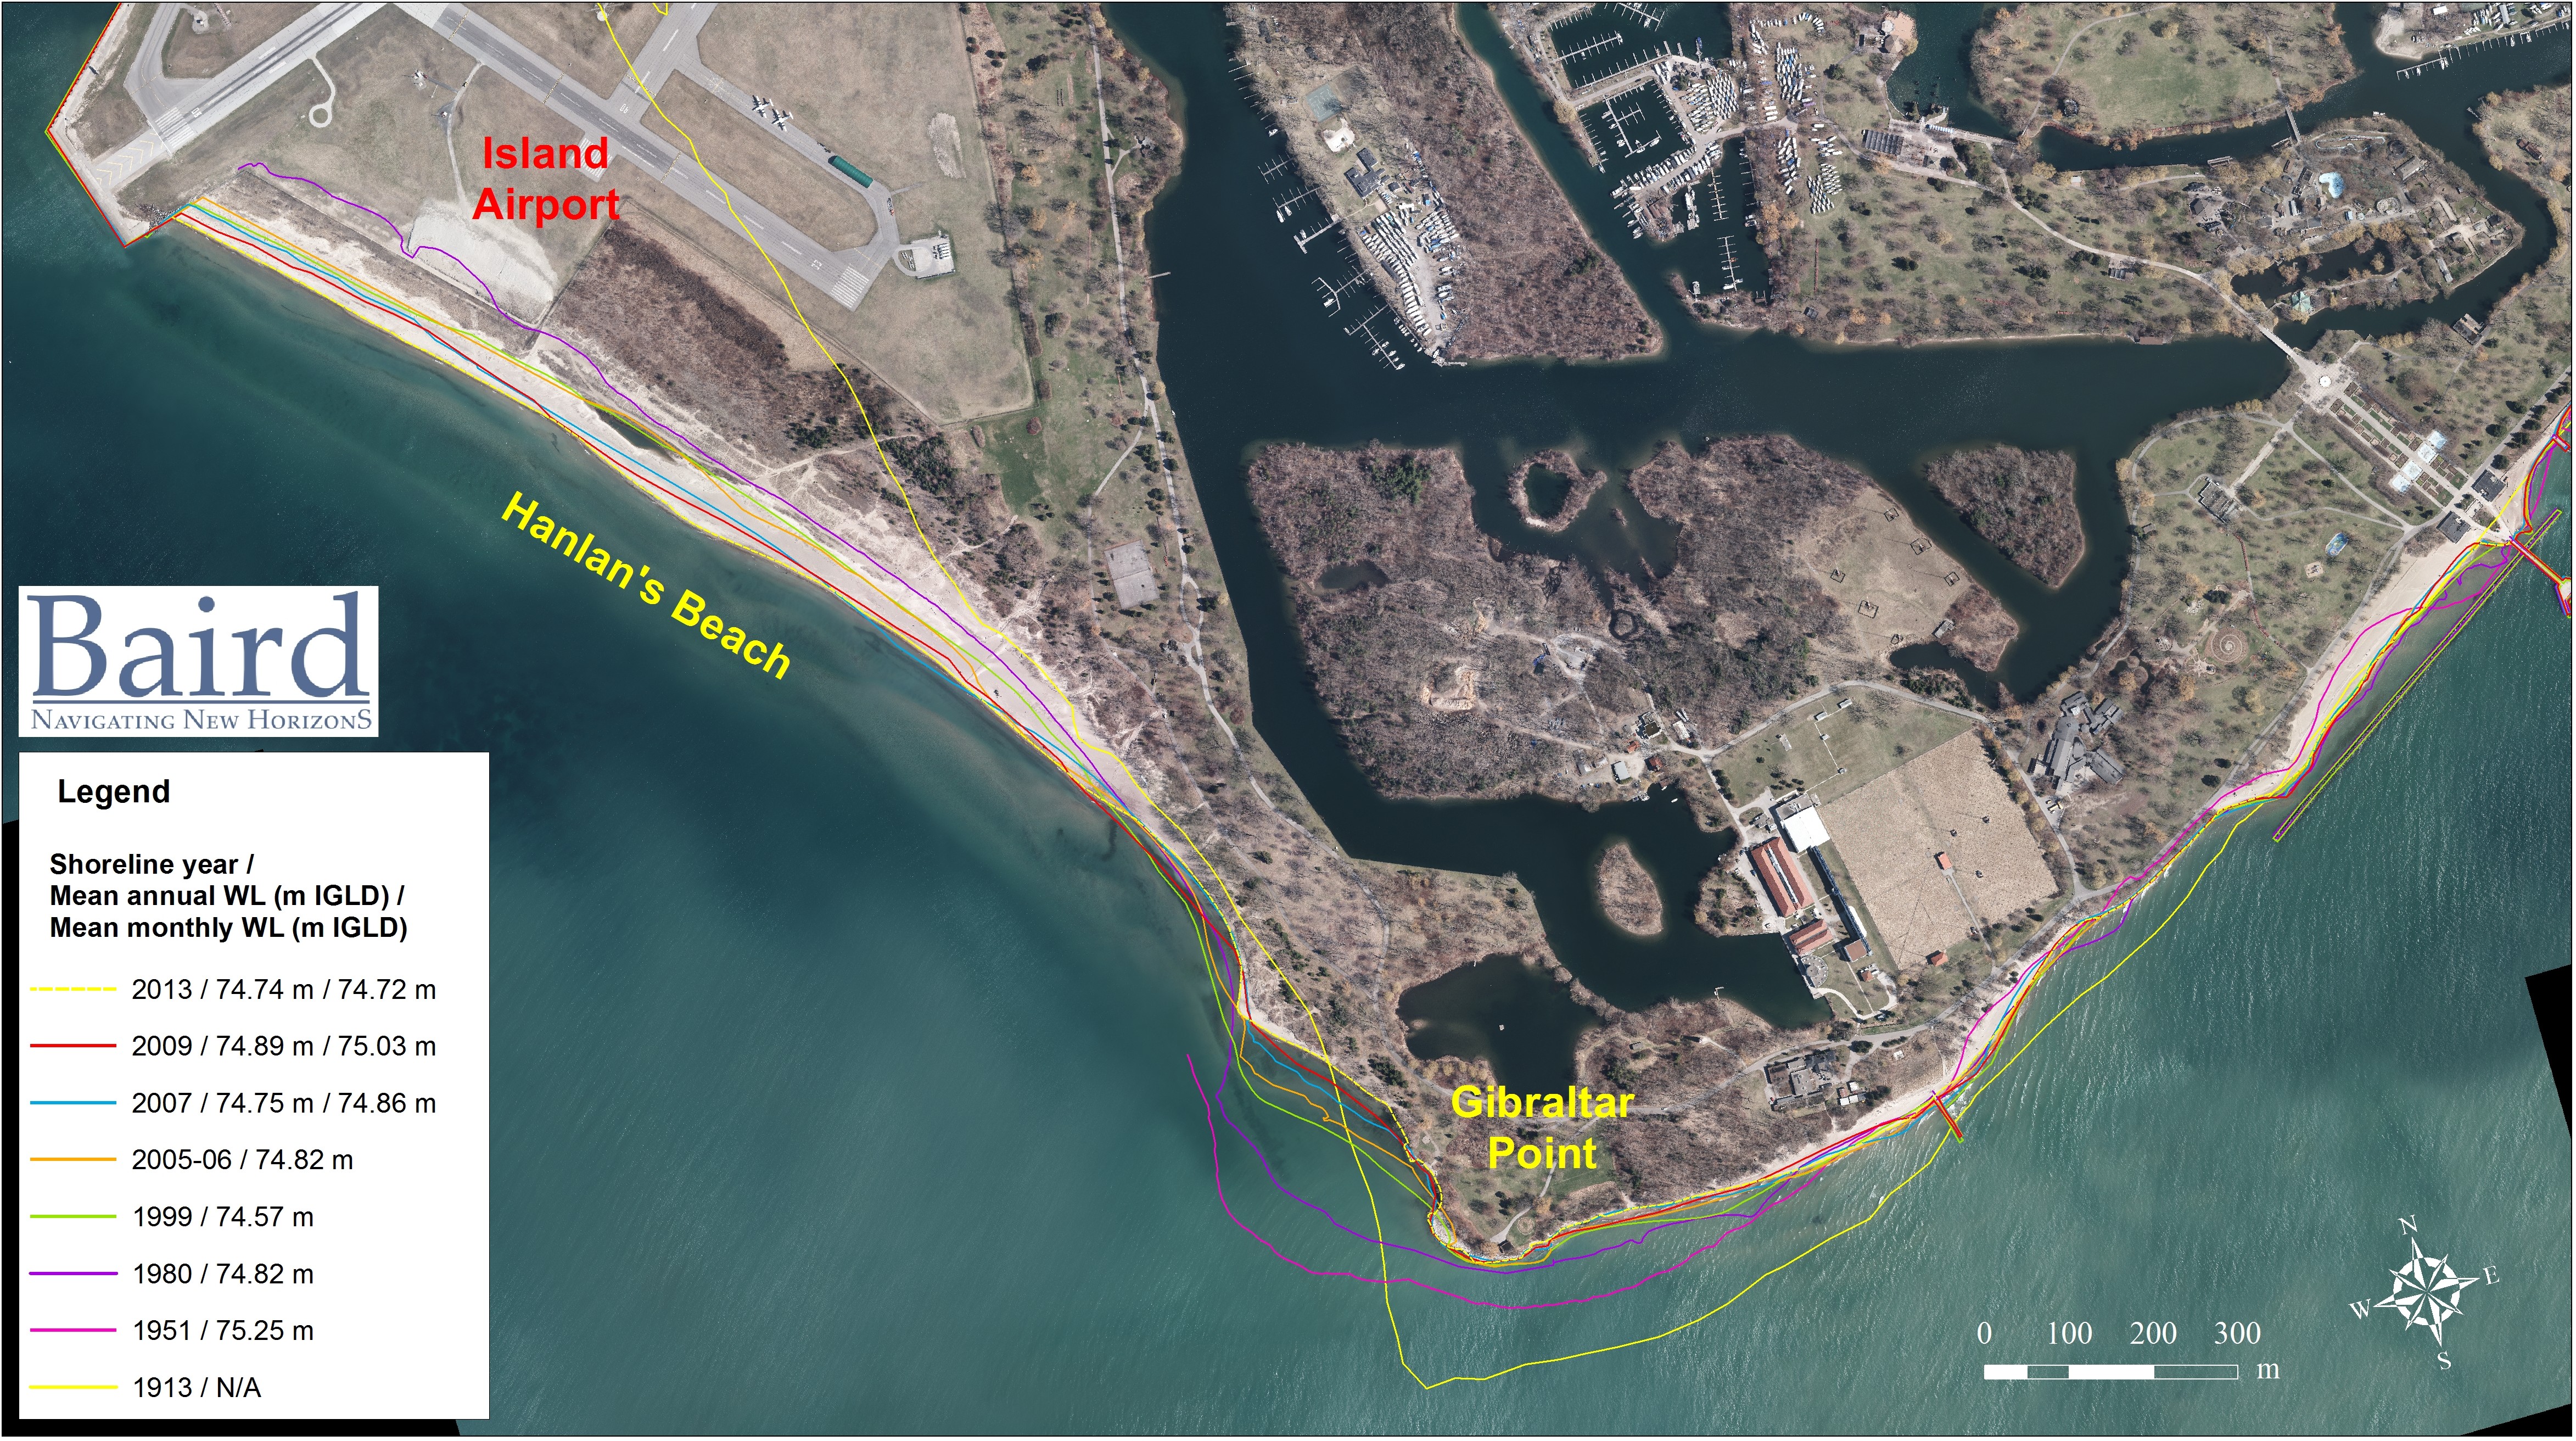 Gibraltar Point Erosion Control Project Historic Shoreline from 1913 to 2013